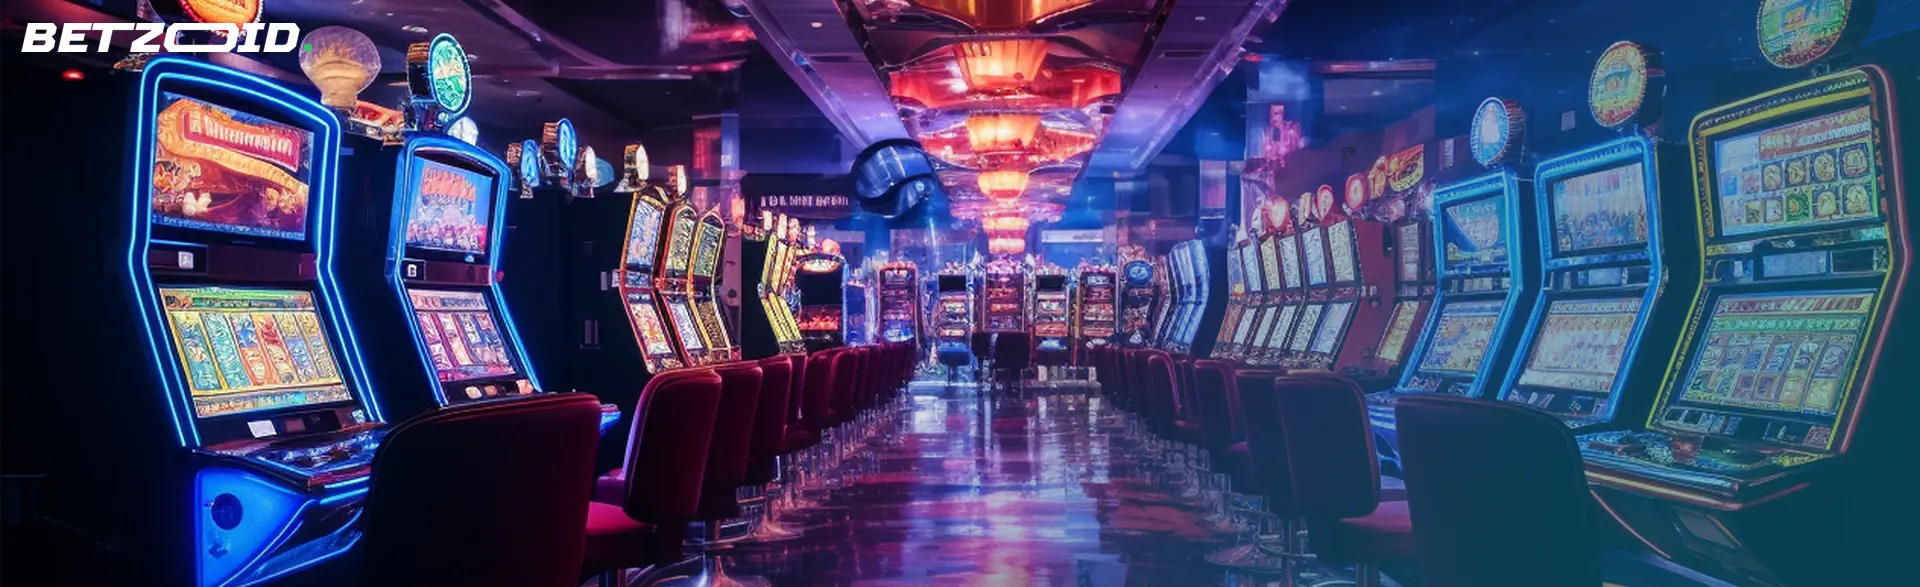 A casino slot machine hall, symbolizing the world of real money casino apps for Android.